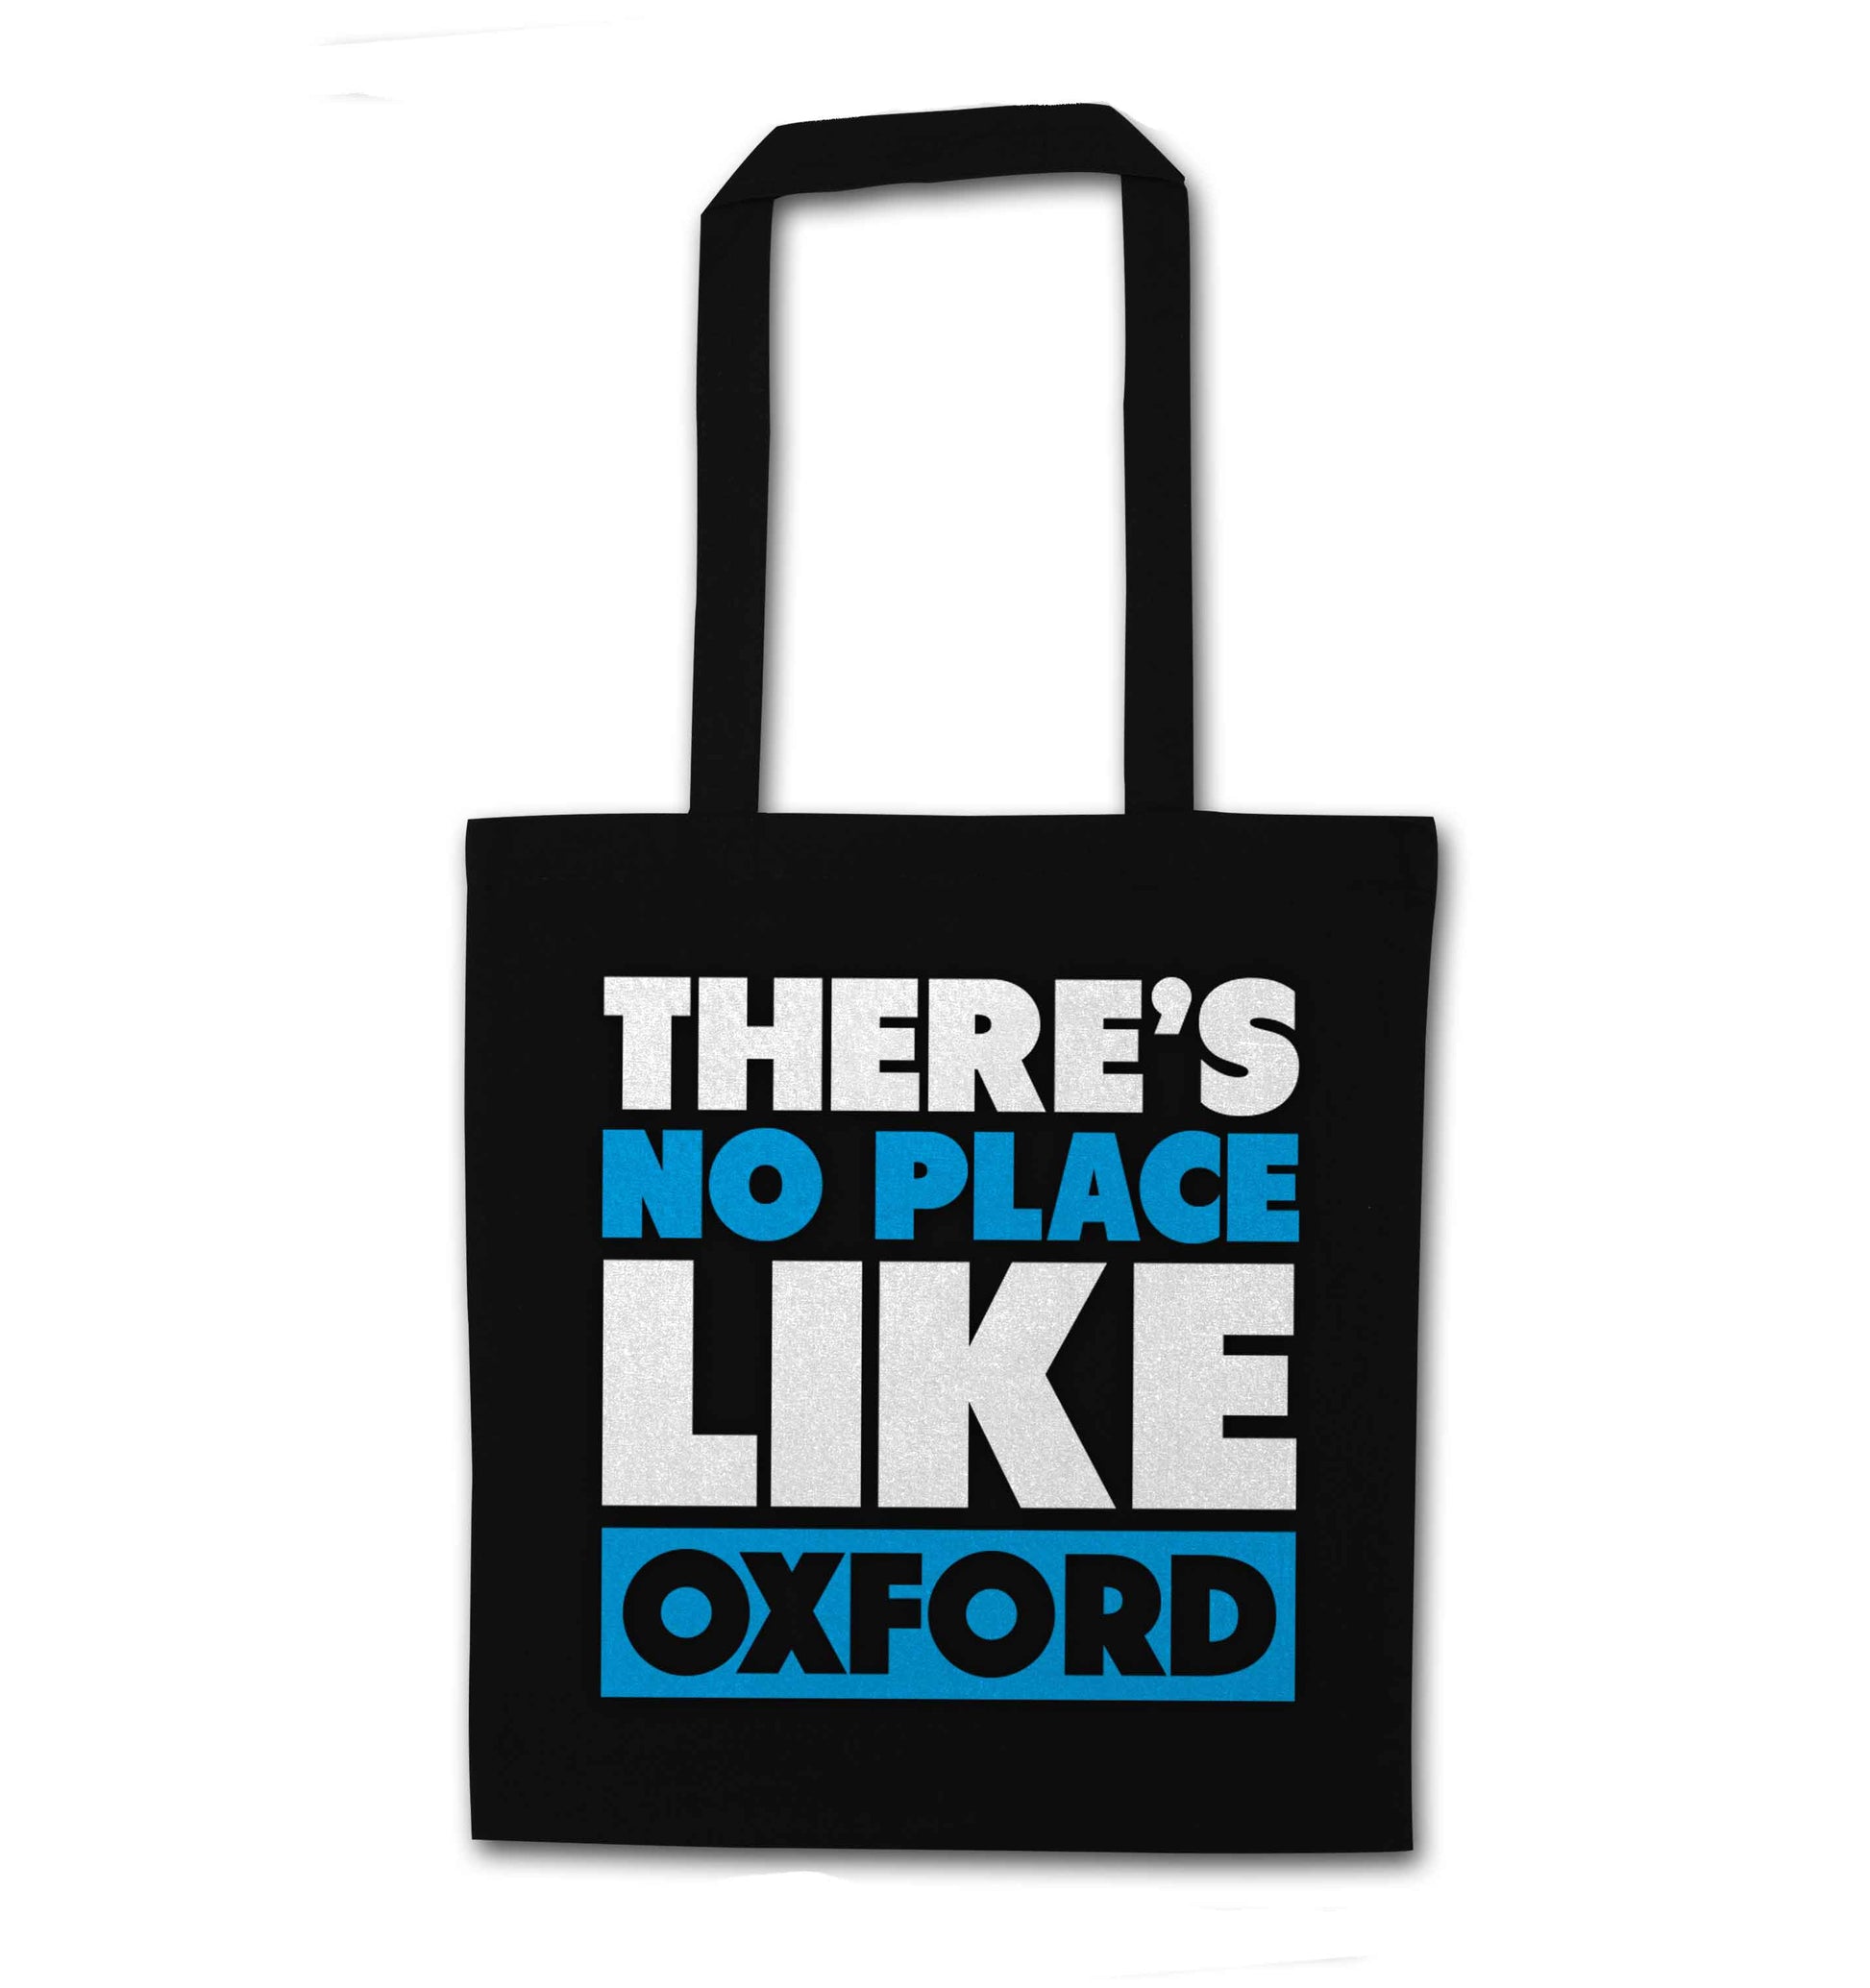 There's no place like Oxford black tote bag